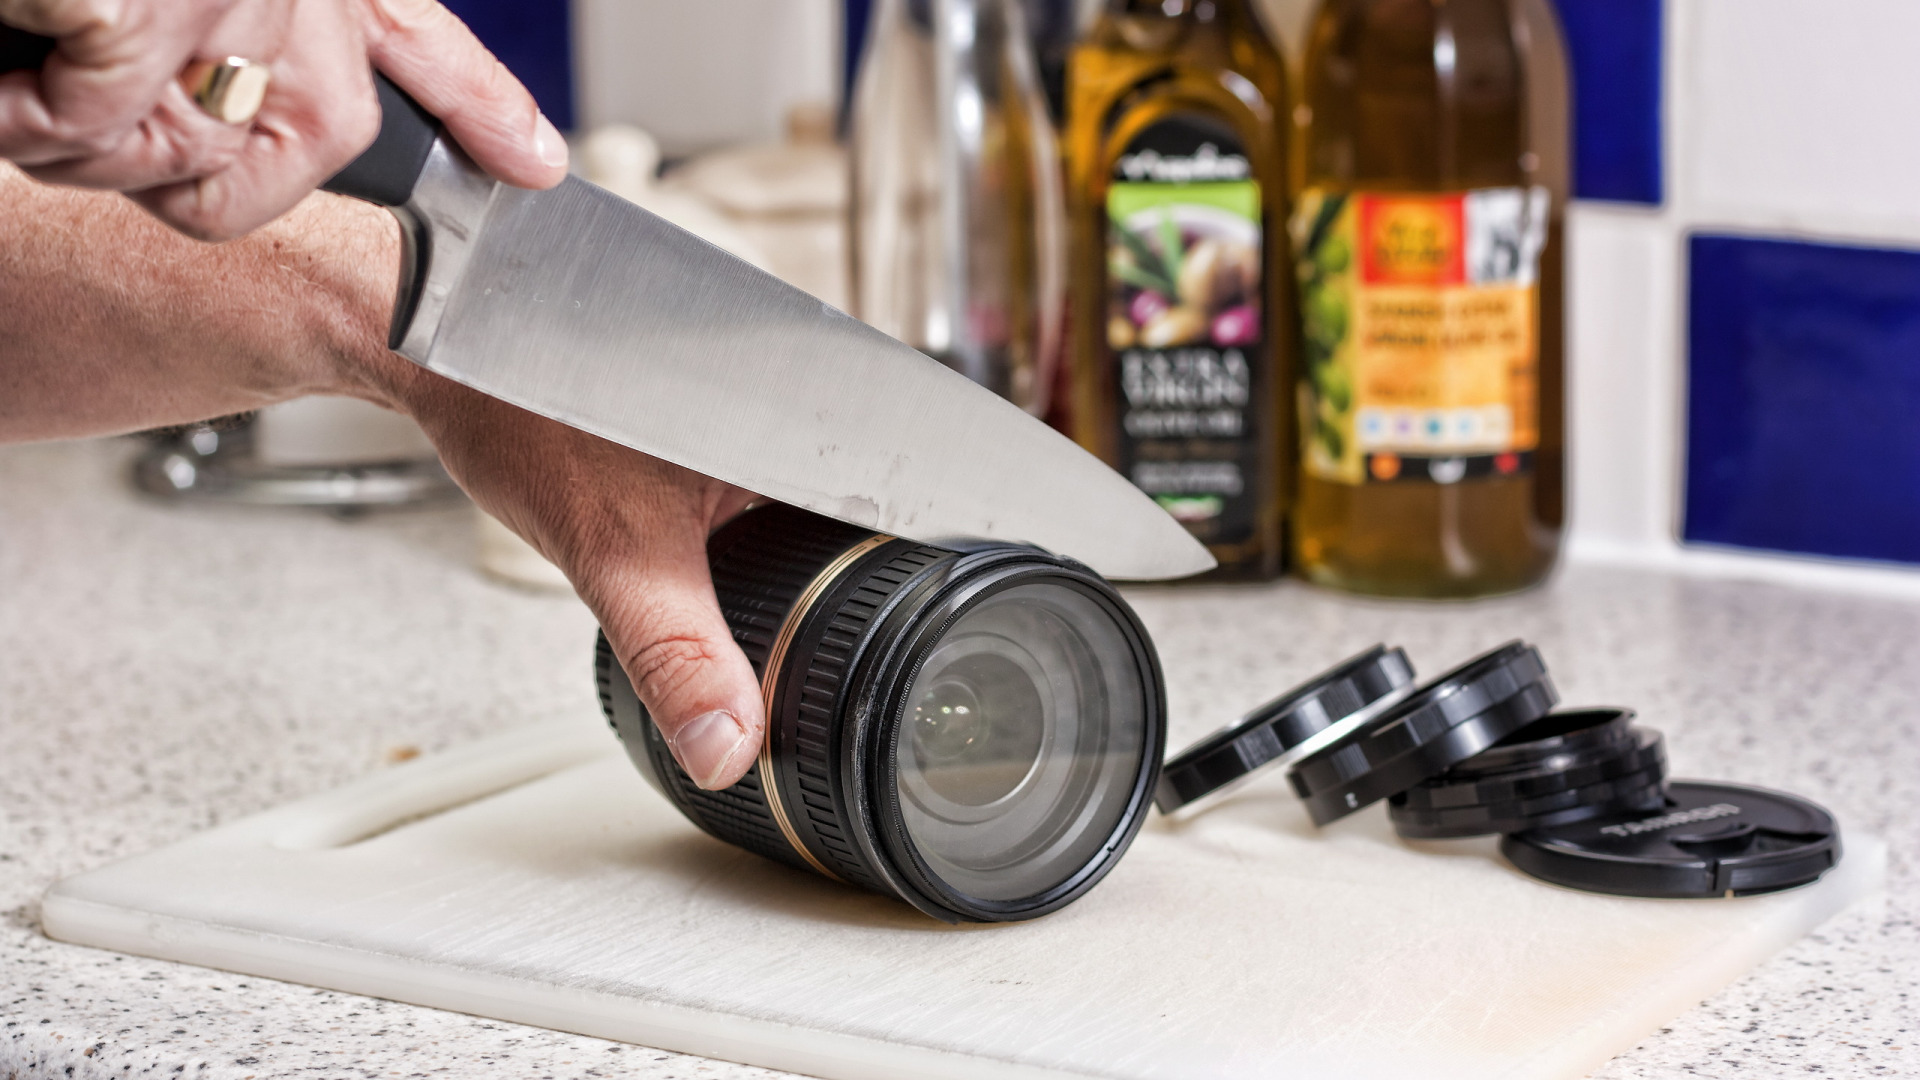 General 1920x1080 knife cutting board lens hands bottles humor depth of field fingers table photography